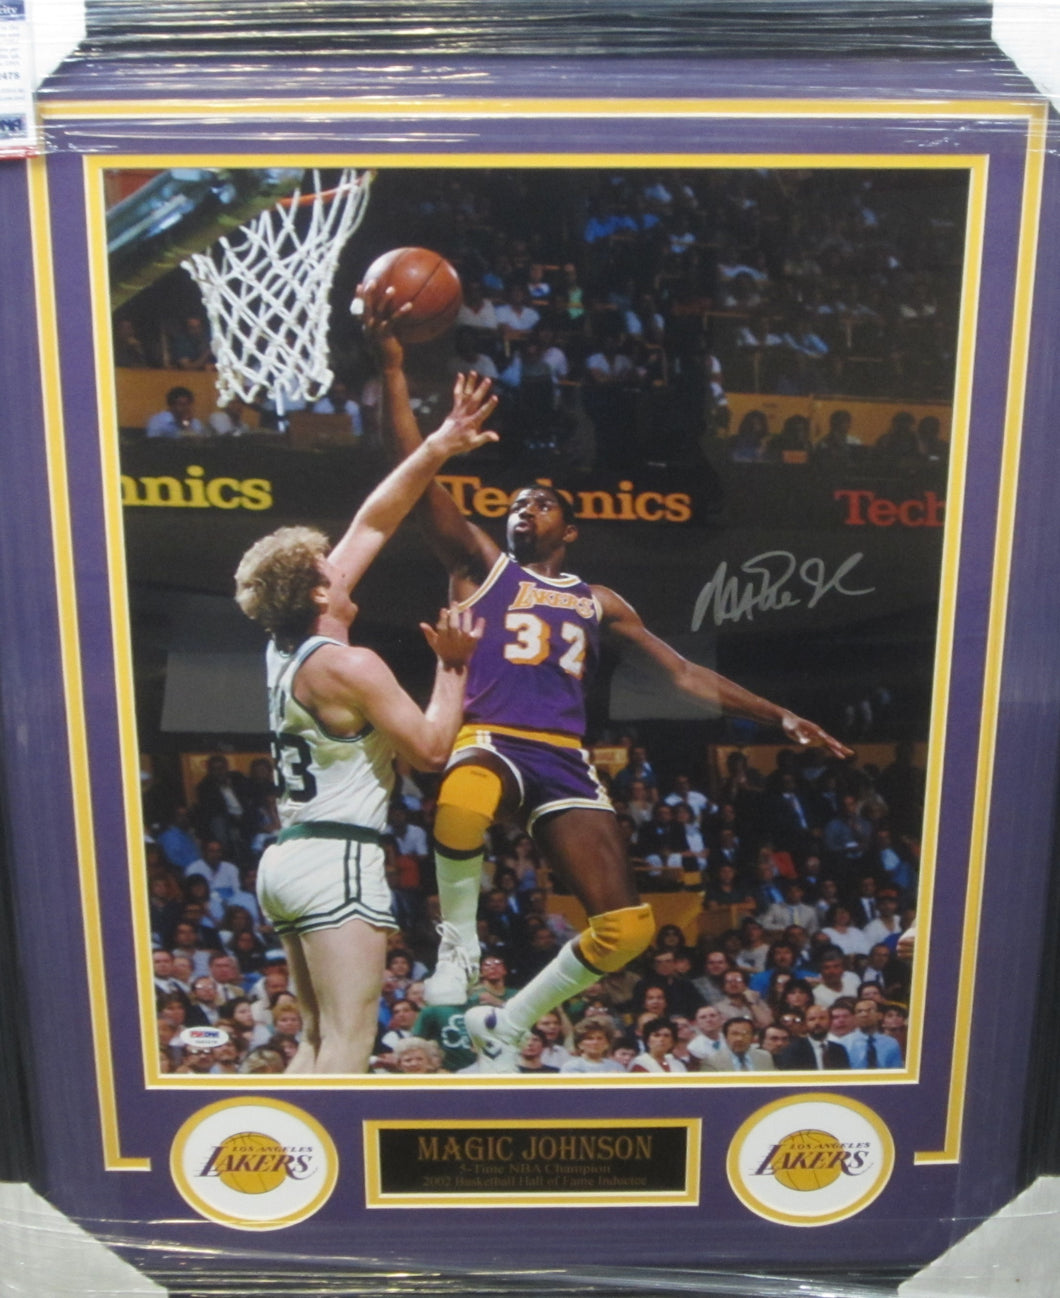 Los Angeles Lakers Magic Johnson Signed 16x20 Photo Framed & Matted with PSA COA